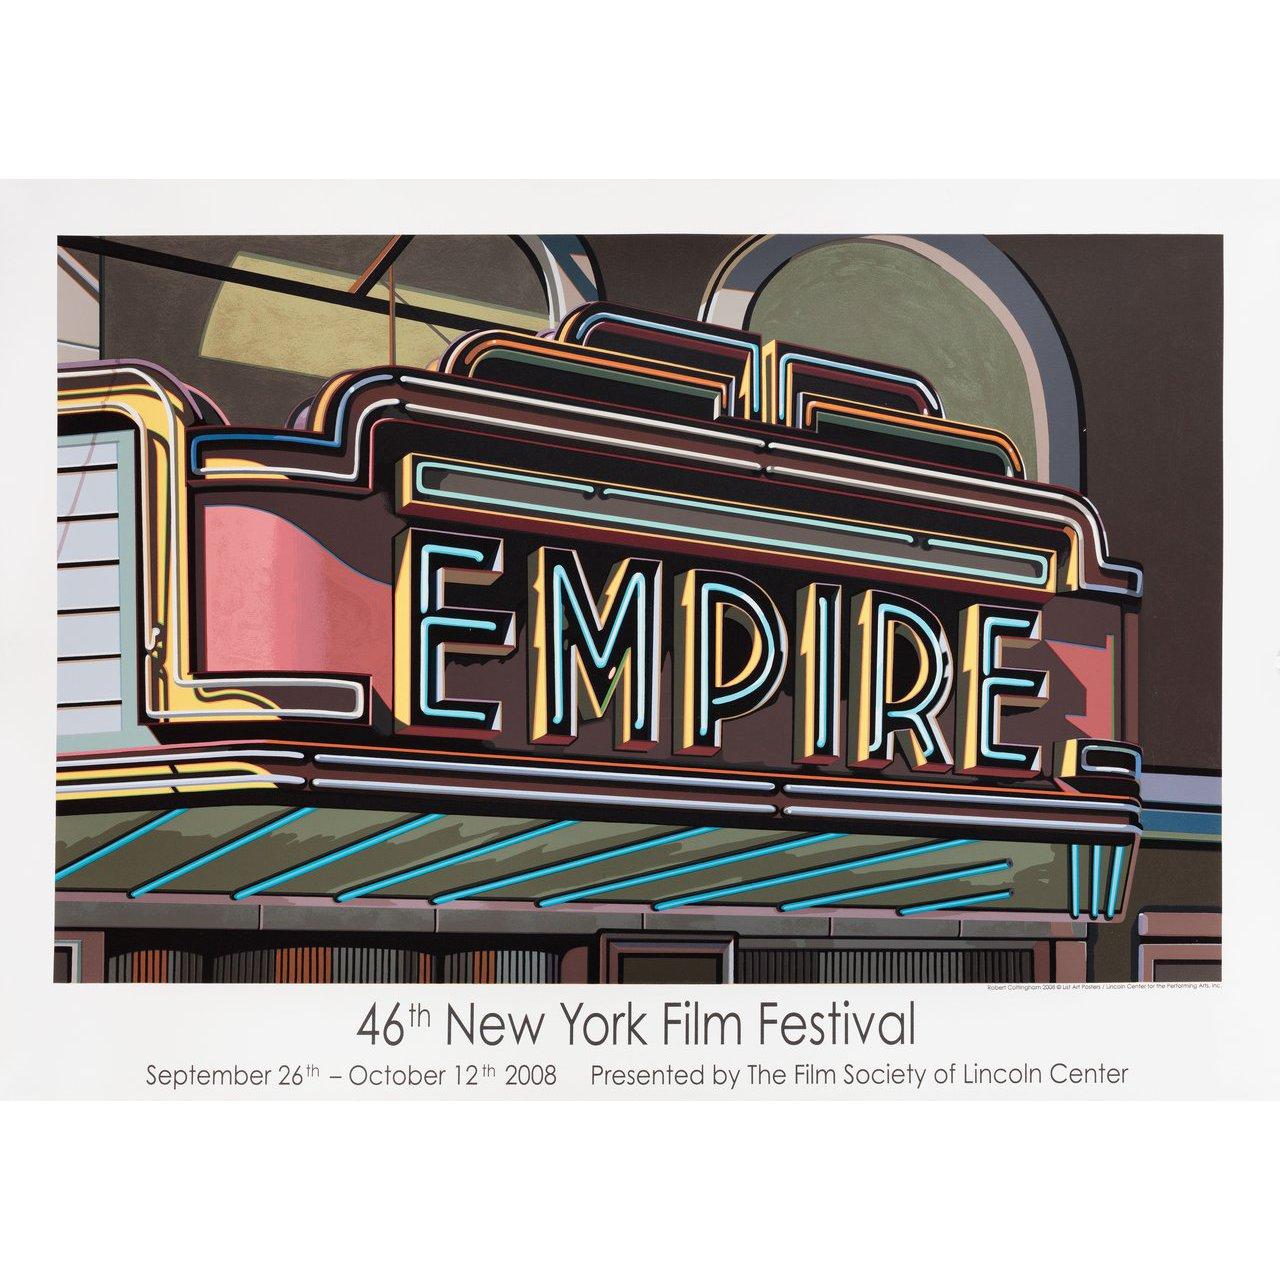 Original 2008 U.S. half subway poster by Robert Cottingham for the 1963 festival New York Film Festival. Very Good-Fine condition, rolled. Please note: the size is stated in inches and the actual size can vary by an inch or more.
